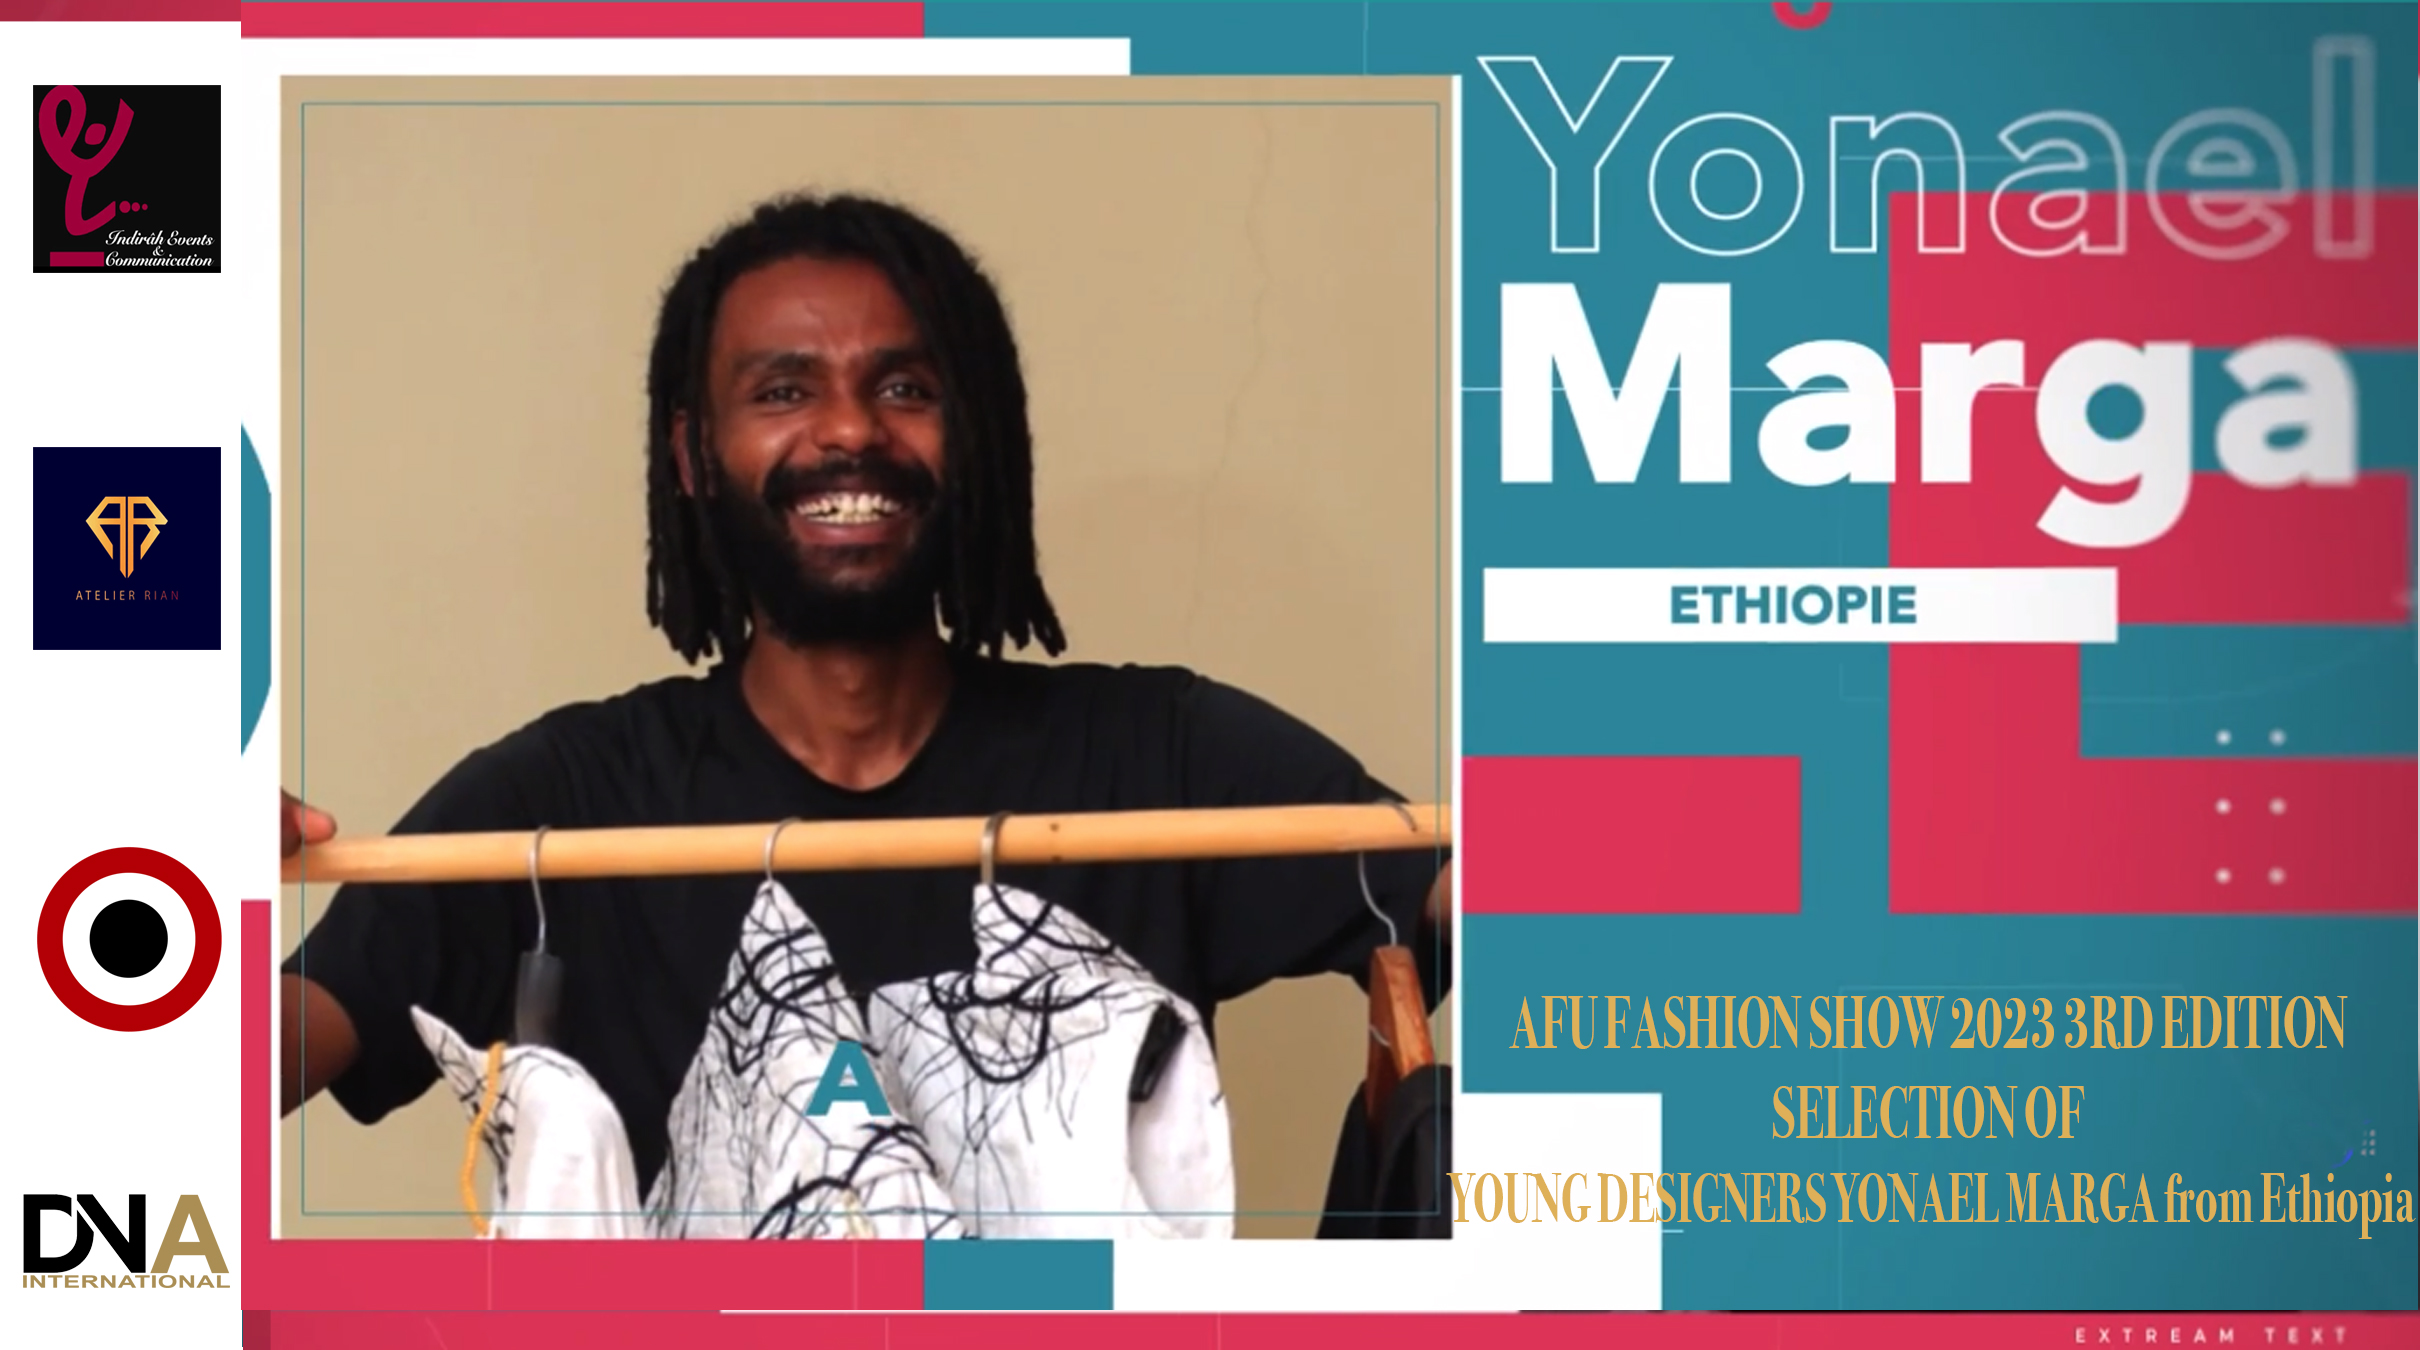 AFRICA-VOGUE-COVER-AFU-FASHION-SHOW-2023-3RD-EDITION-SELECTION-OF-YOUNG-DESIGNERS-YONAEL-MARGA-from-Ethiopia-DN-AFRICA-MEDIA-PARTNER